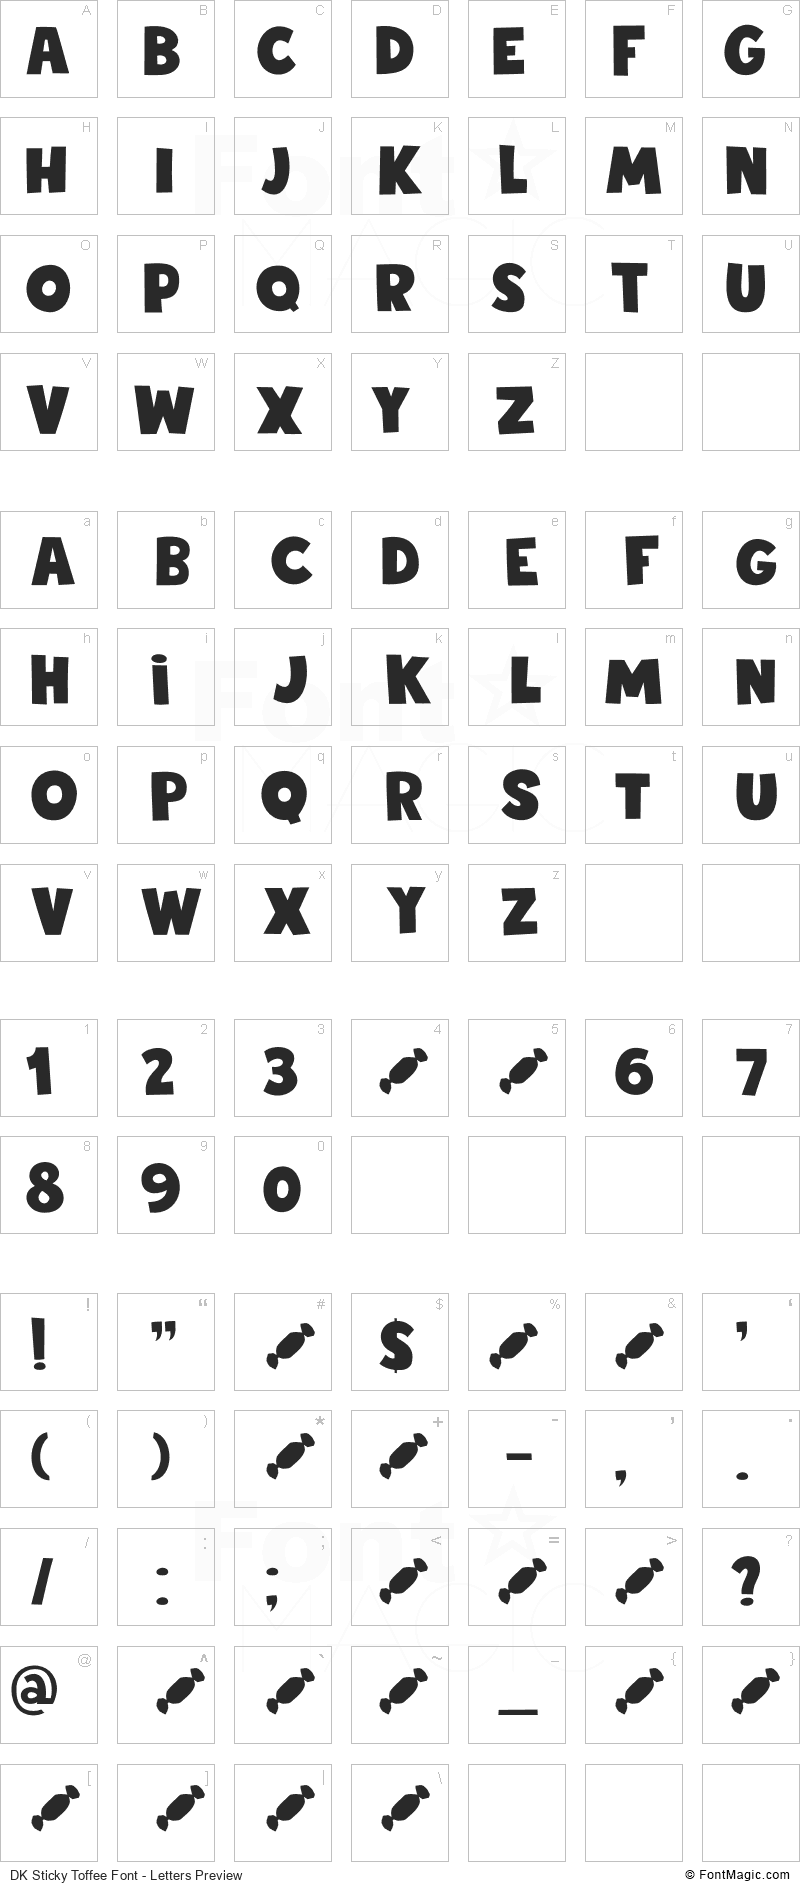 DK Sticky Toffee Font - All Latters Preview Chart